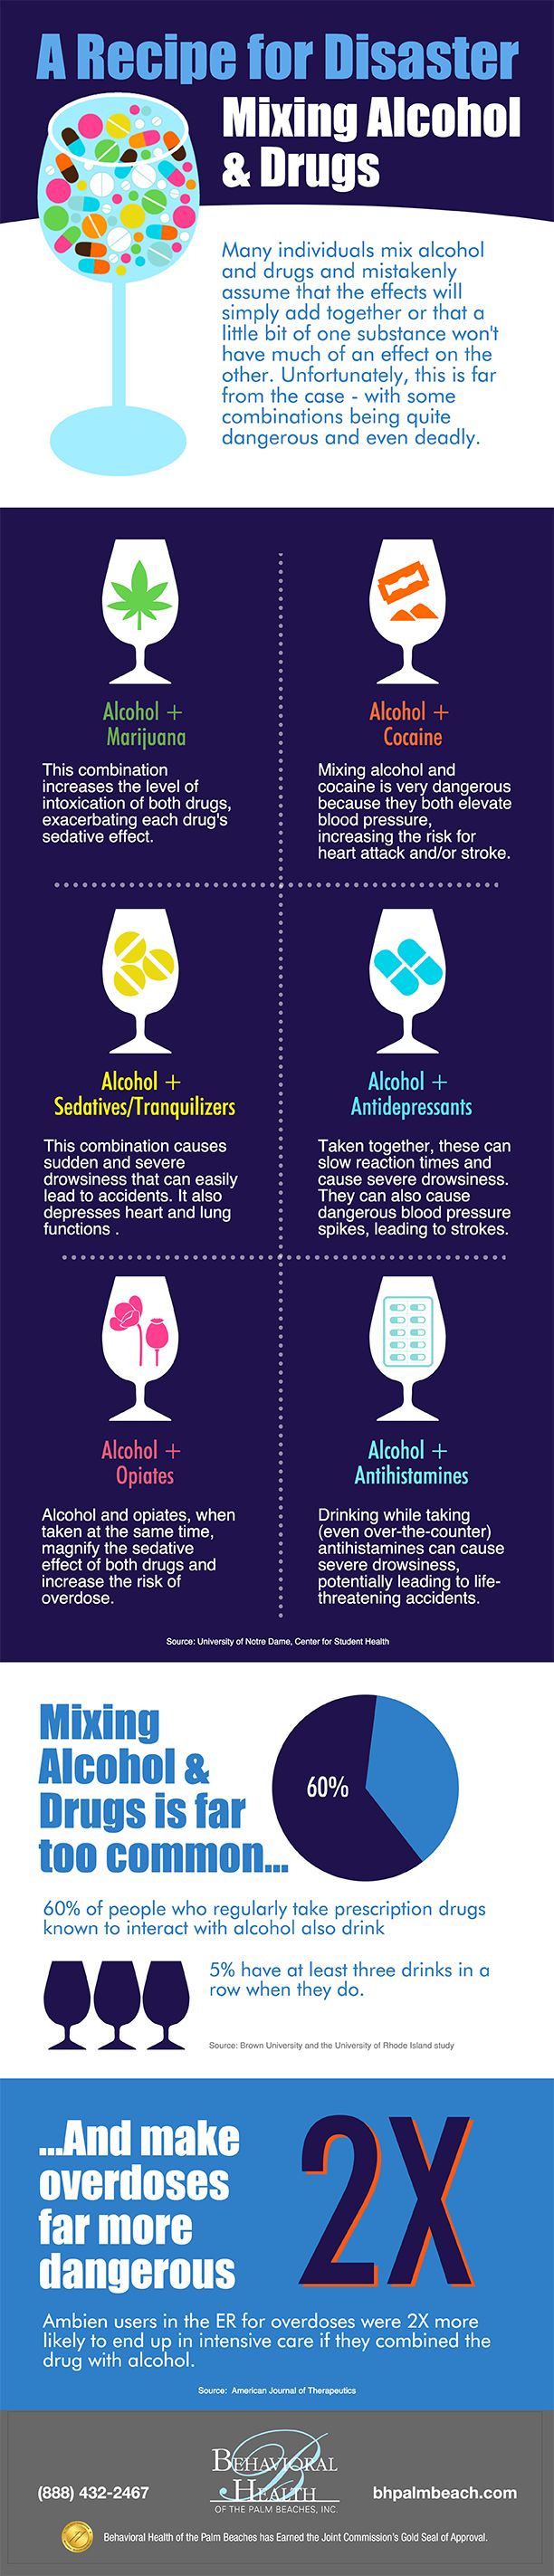 Psychology-Infographic-Mixing-Alcohol-and-Drugs-a-dangerous-combination.-If-you-are-mixing-drugs-most Psychology Infographic : Mixing Alcohol and Drugs- a dangerous combination. If you are mixing drugs, most...